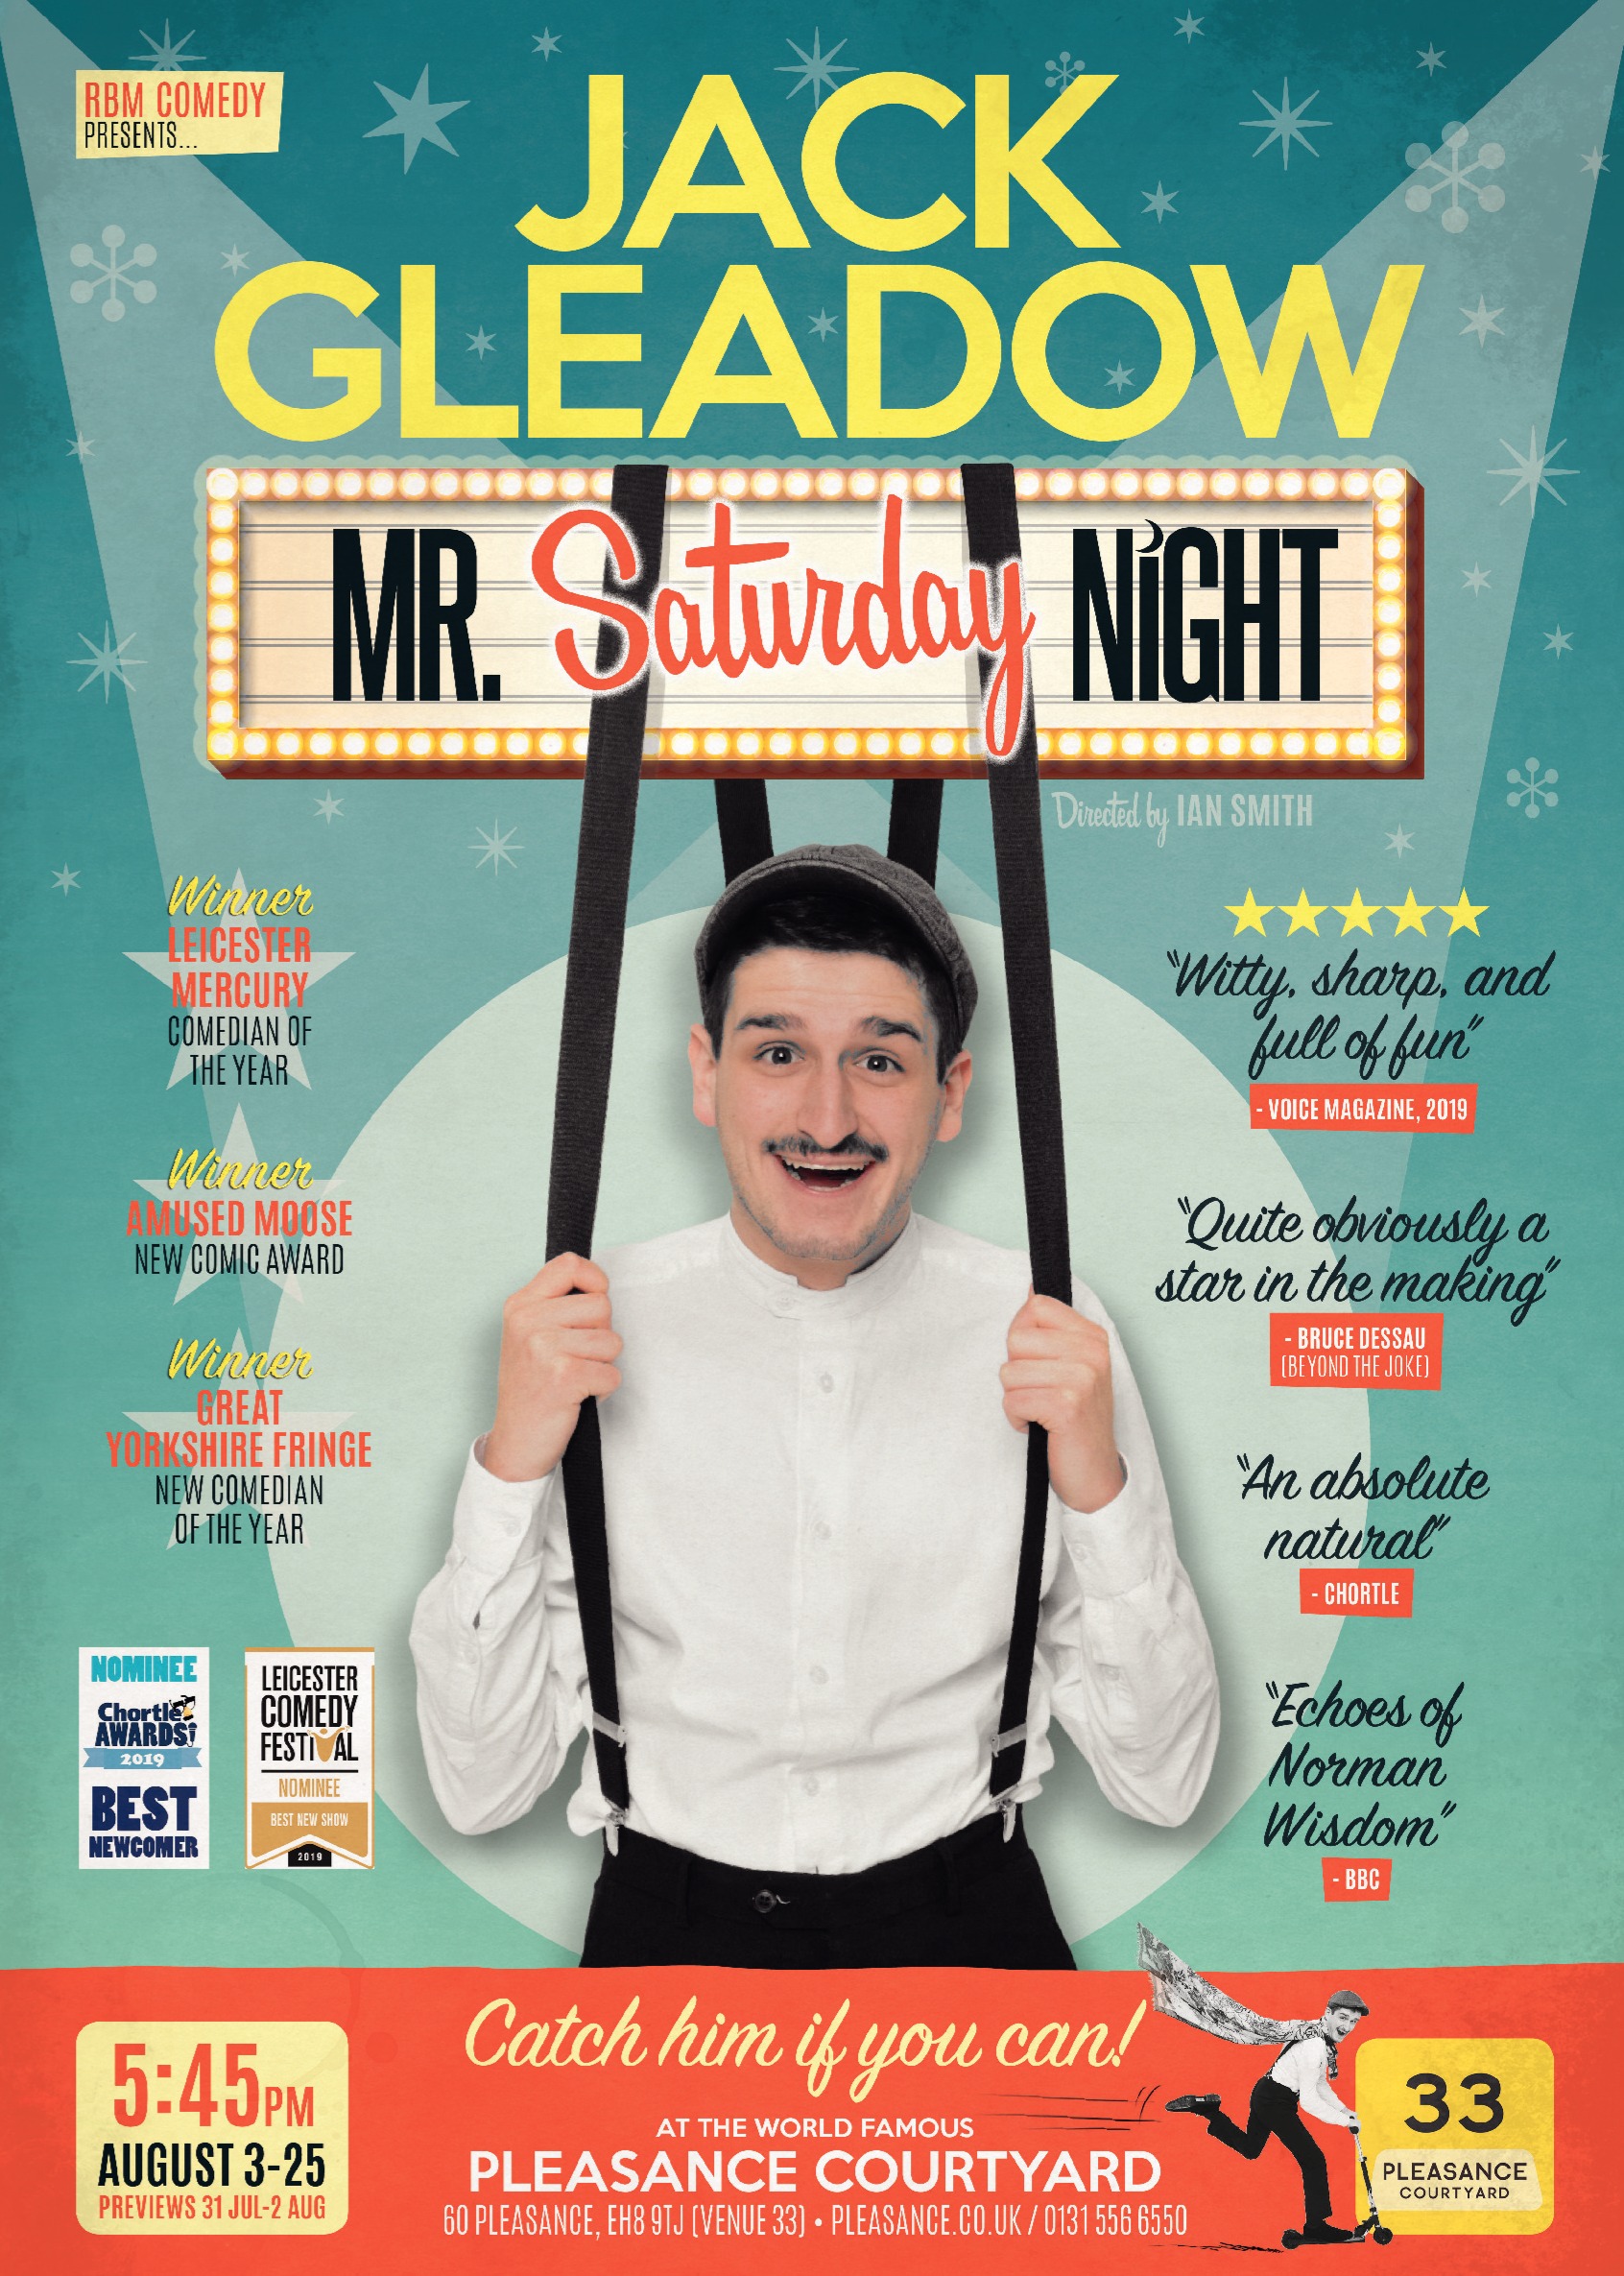 The poster for Jack Gleadow: Mr Saturday Night